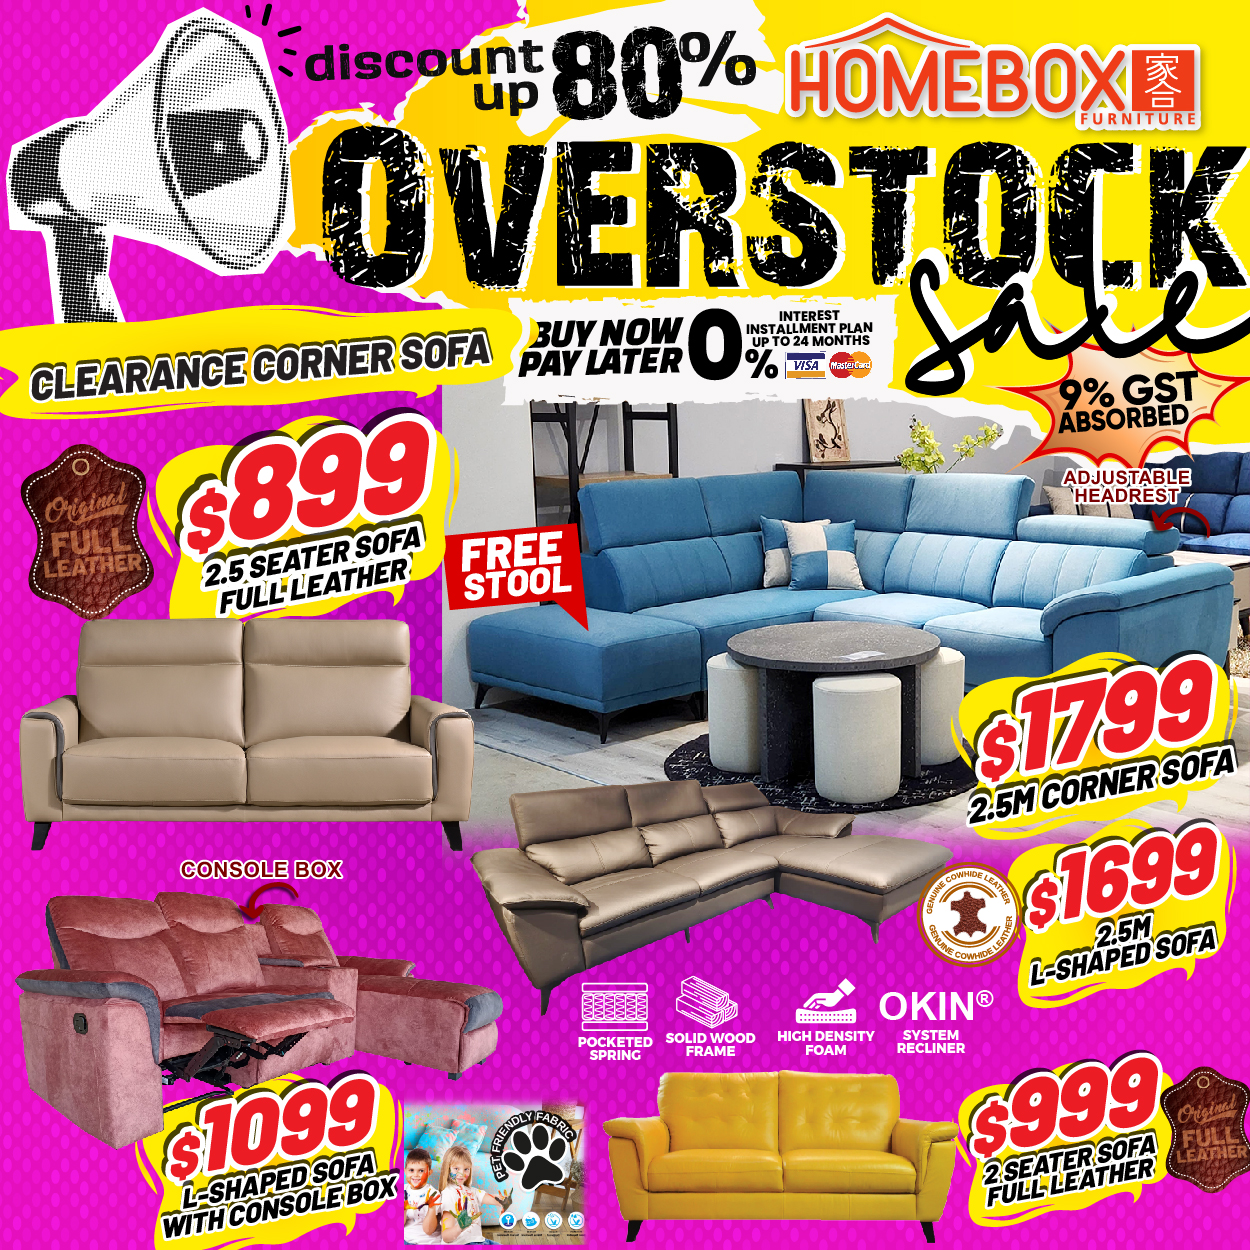 Lobang: Overstock sale at HOMEBOX Furniture @ Aljunied has furniture at up to 80% off from 17 Feb - 3 Mar 24 - 18